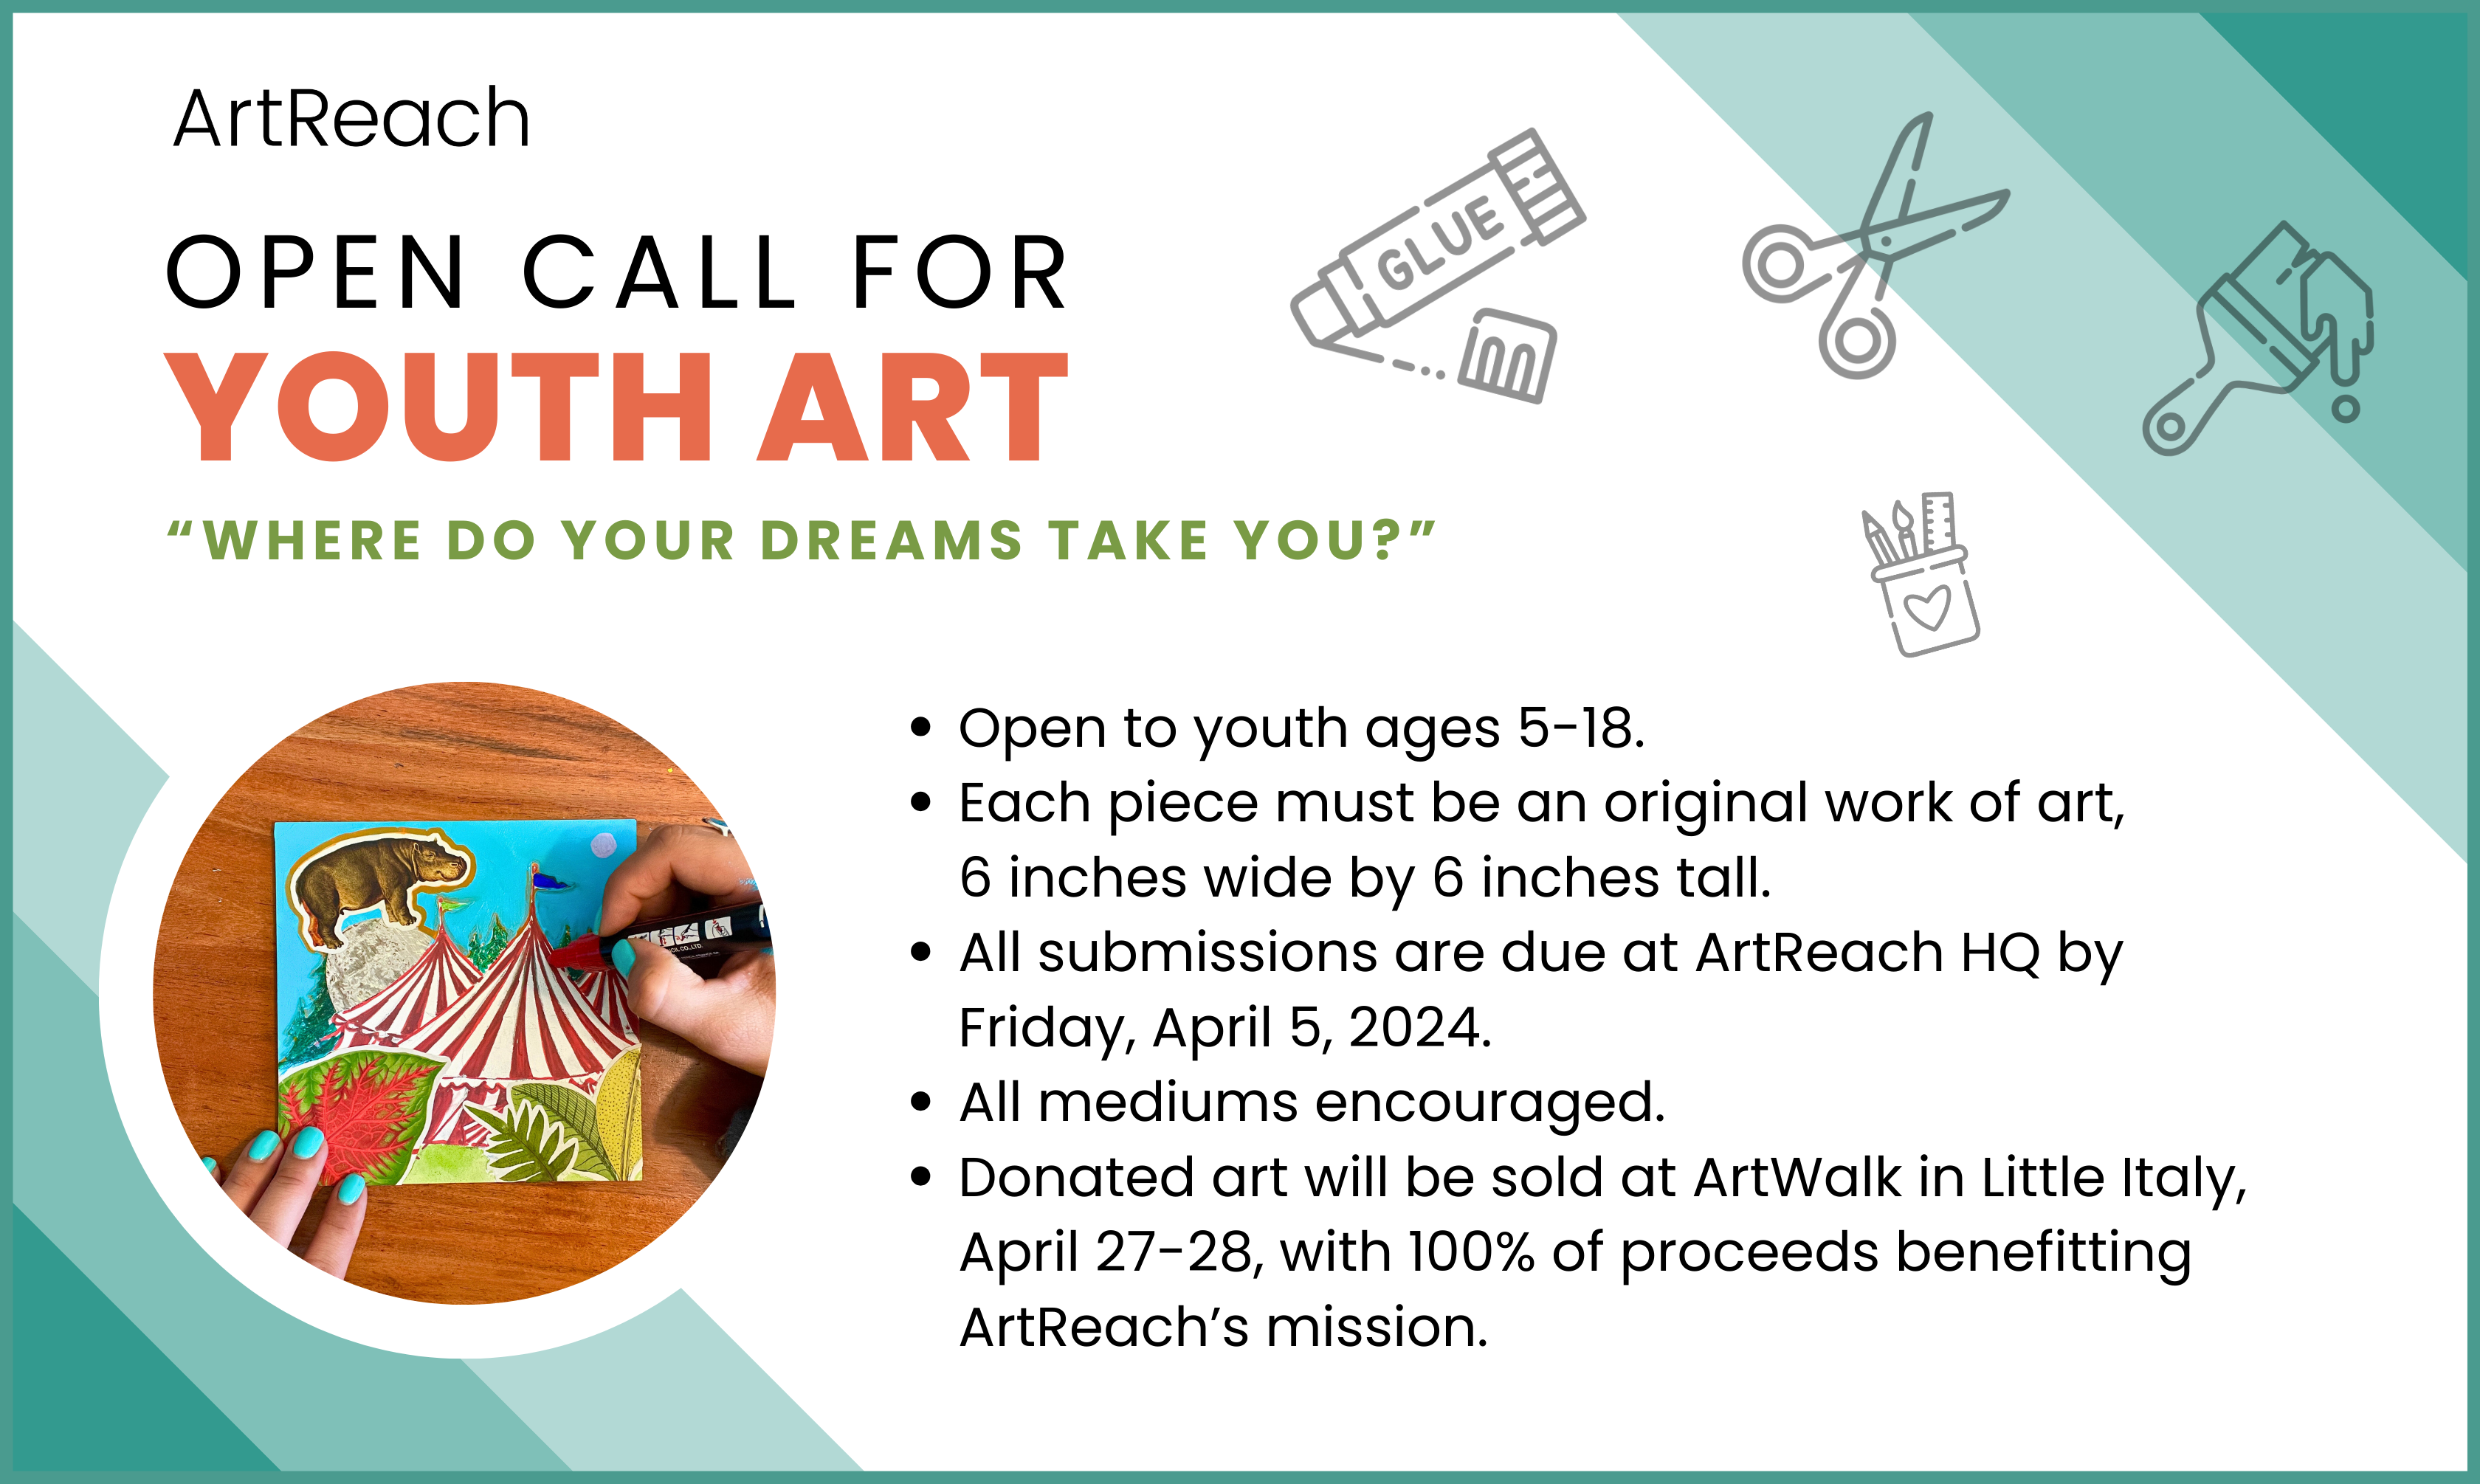 ArtReach's Open Call for Youth Art, open to ages 5-18 following the prompt "Where do Your Dreams Take You?". Submissions are due at the ArtReach office by Friday, April 5, 2024.